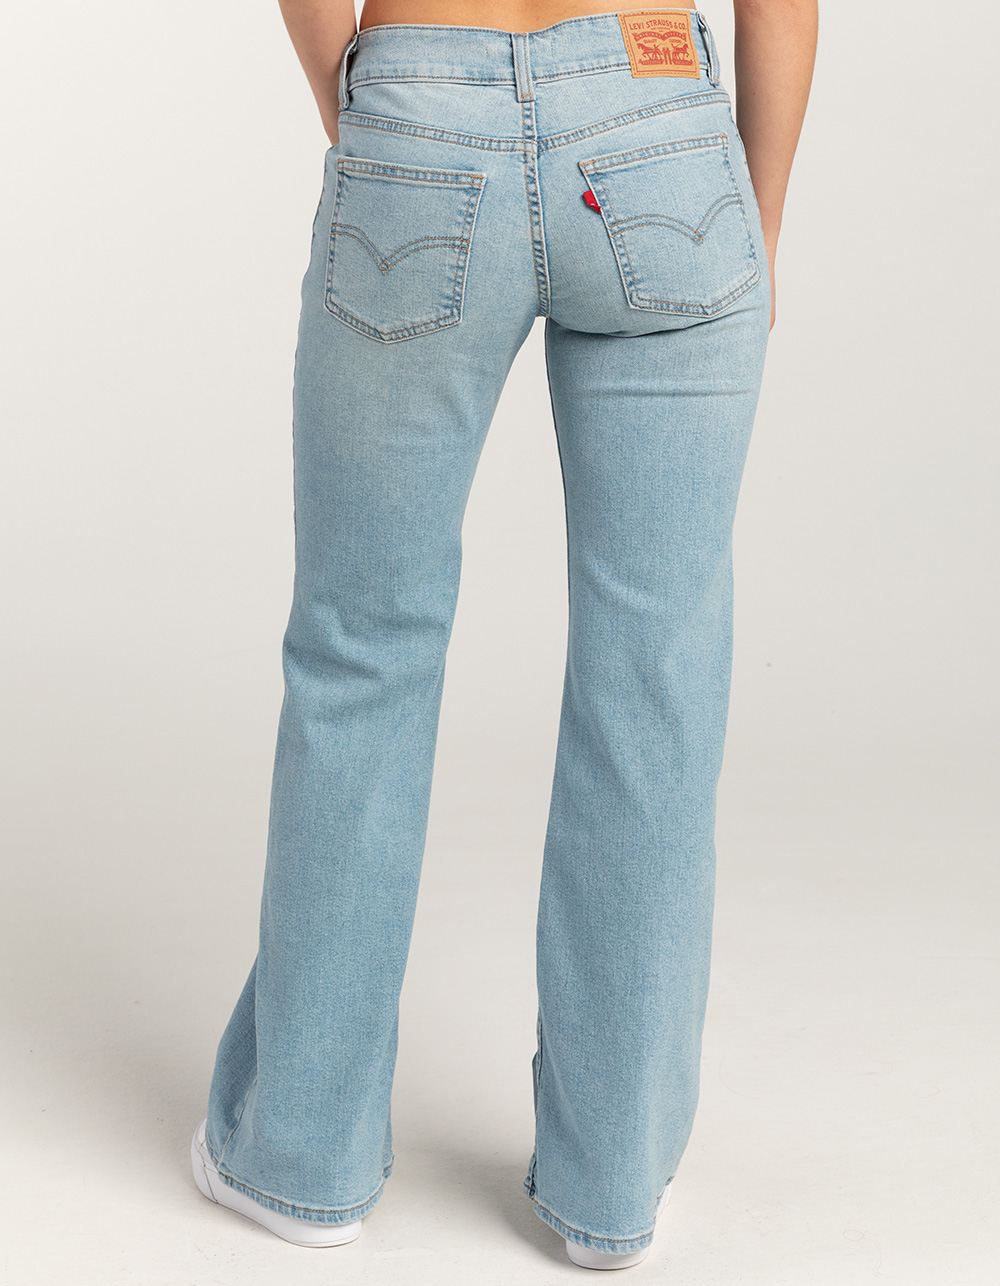 LEVI'S Superlow Flare Womens Jeans - Whoops I Did It Again - LIGHT WASH ...